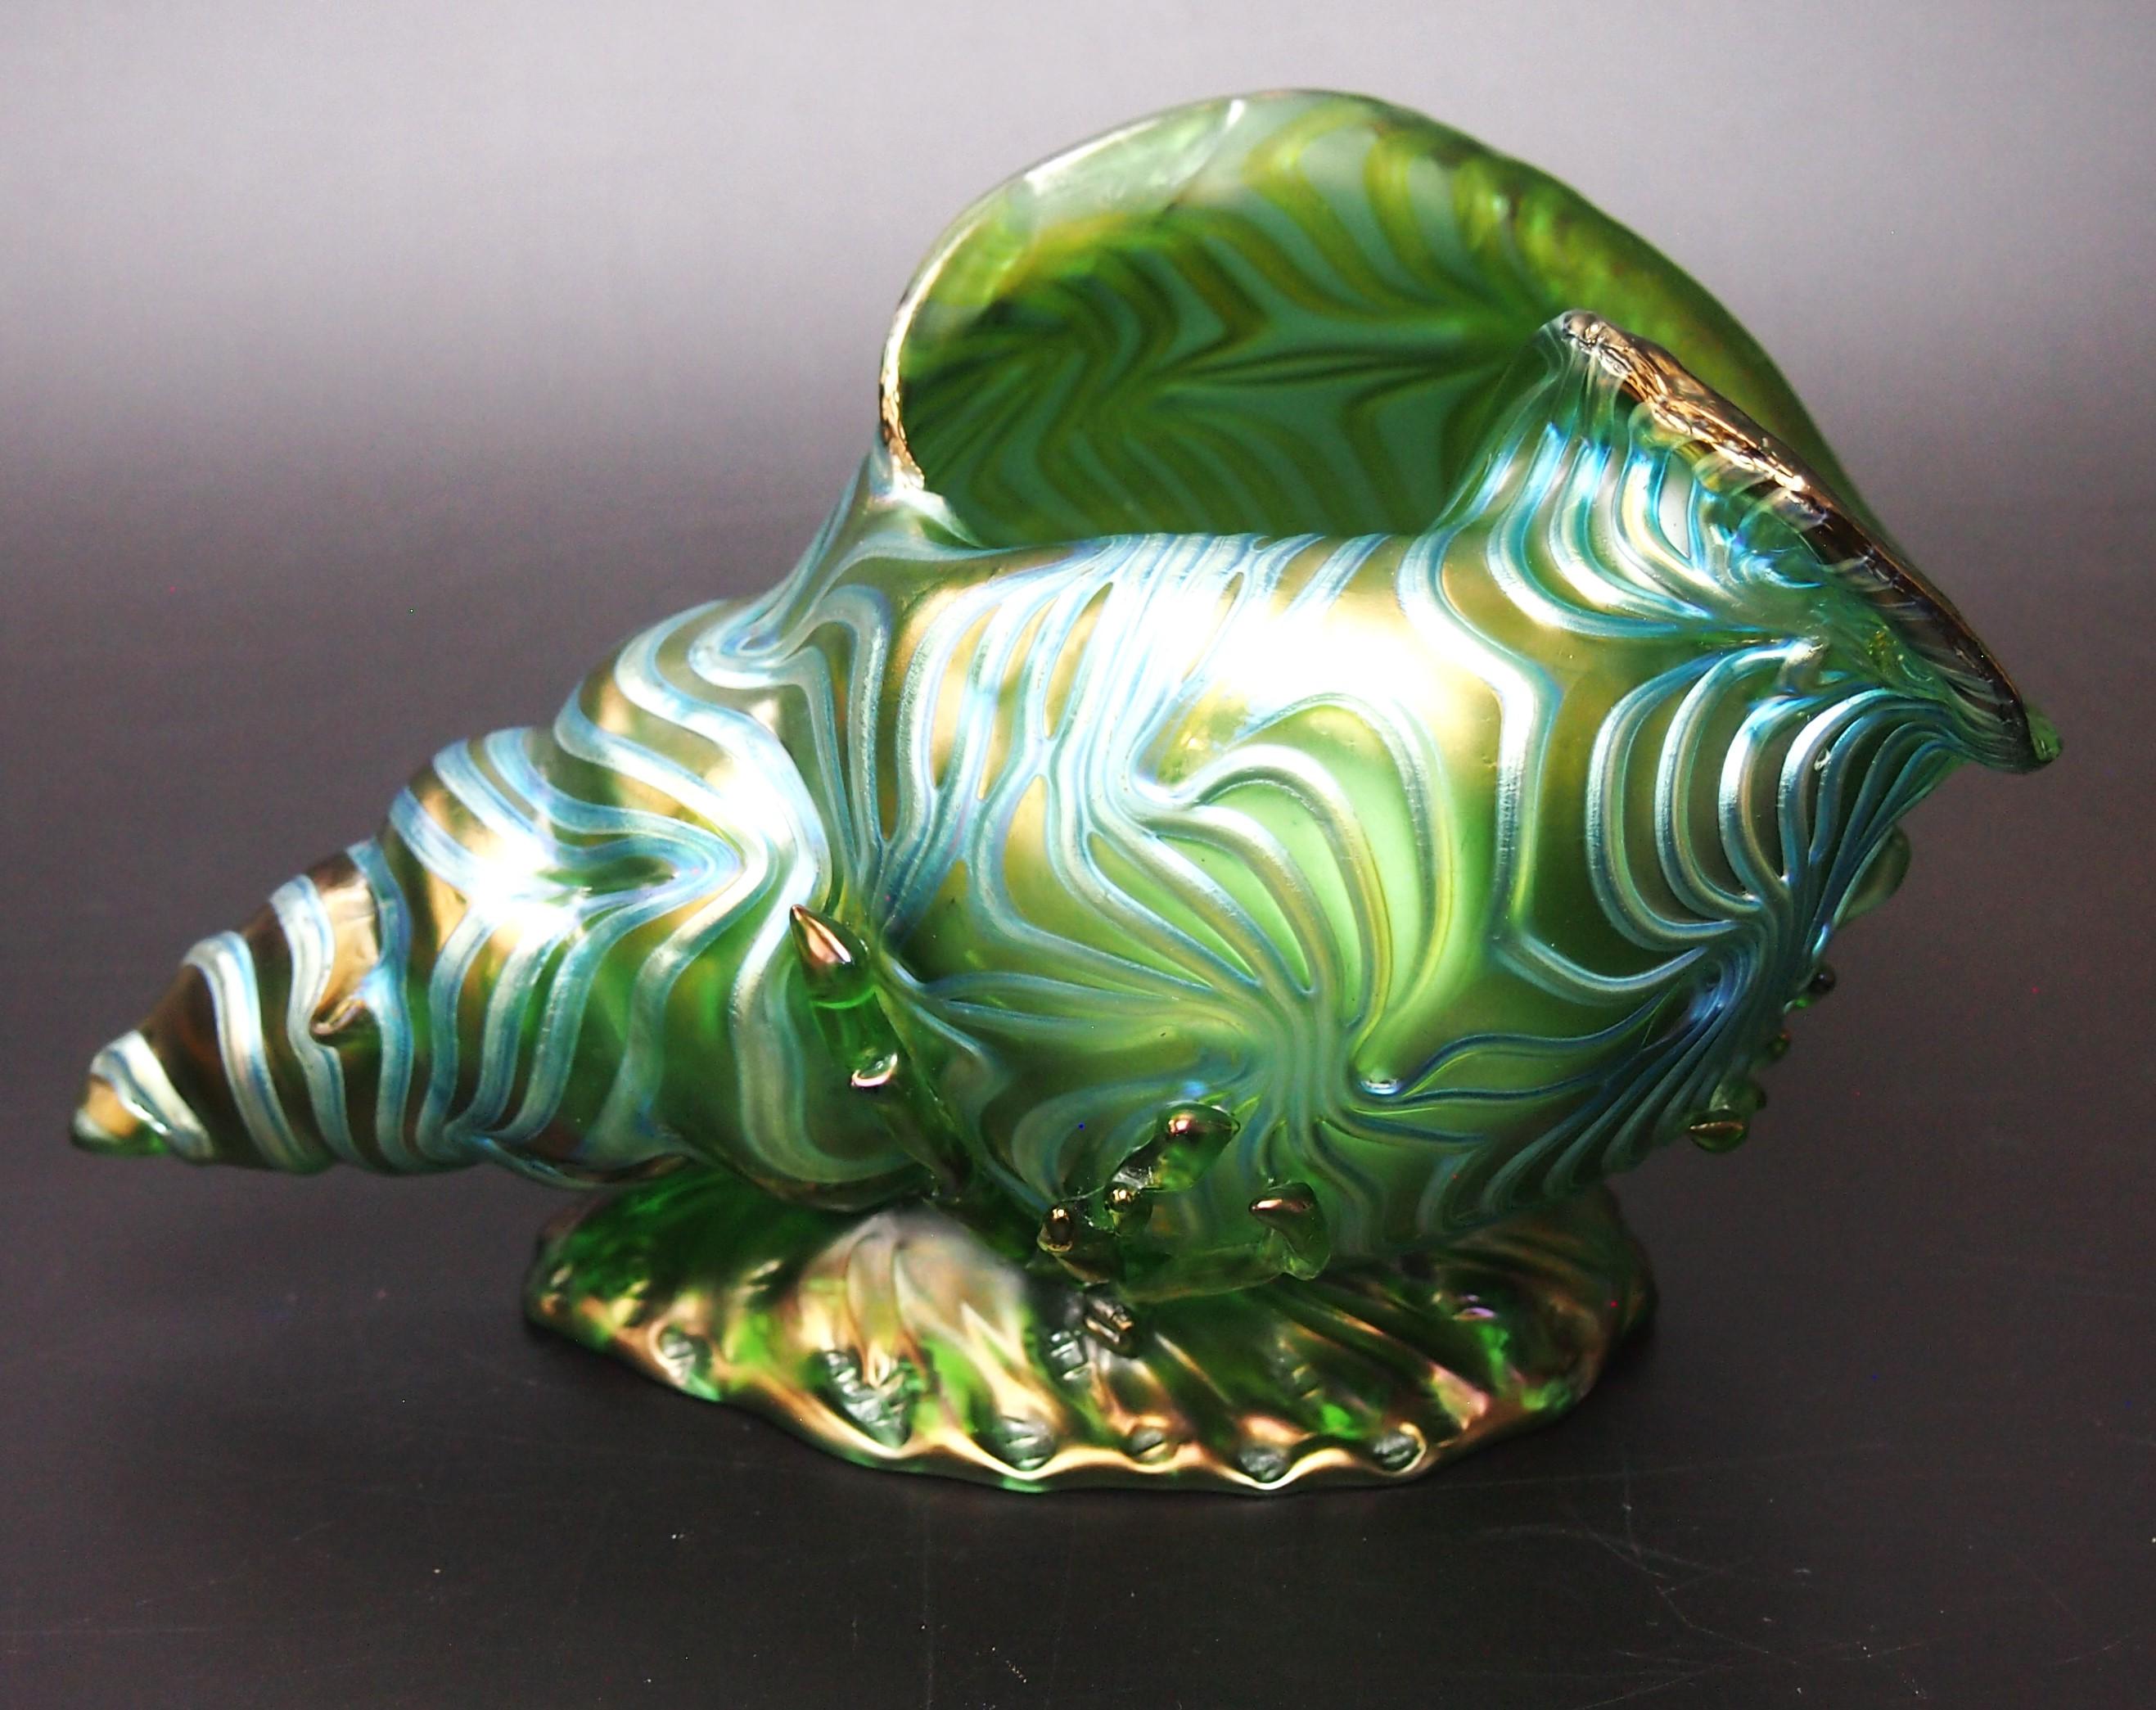 Stunning Loetz Crete Formosa Glass Seashell Vase in green and blue1902 For Sale 3